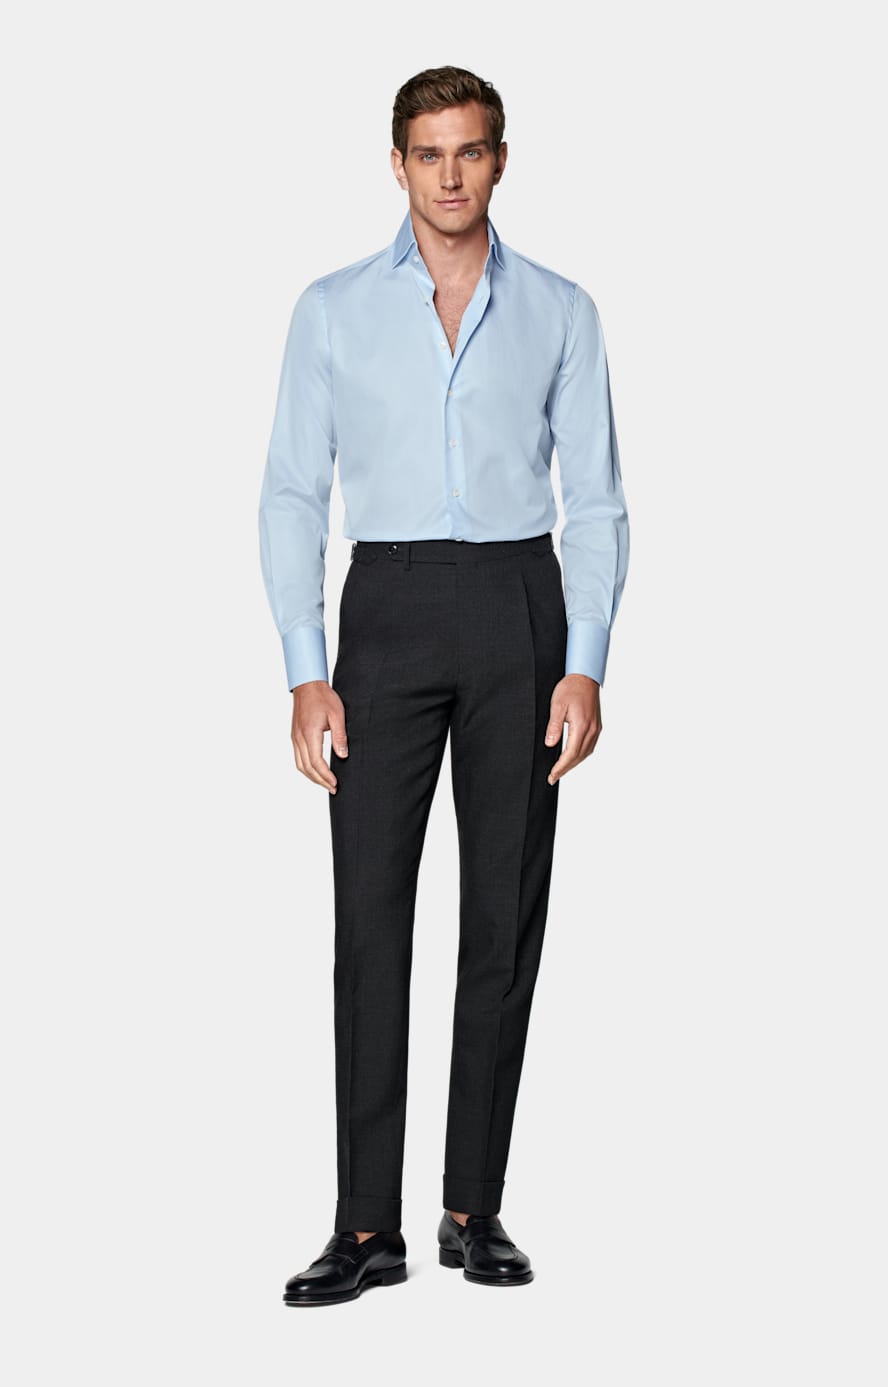 Chemise coupe Tailored en twill bleu clair